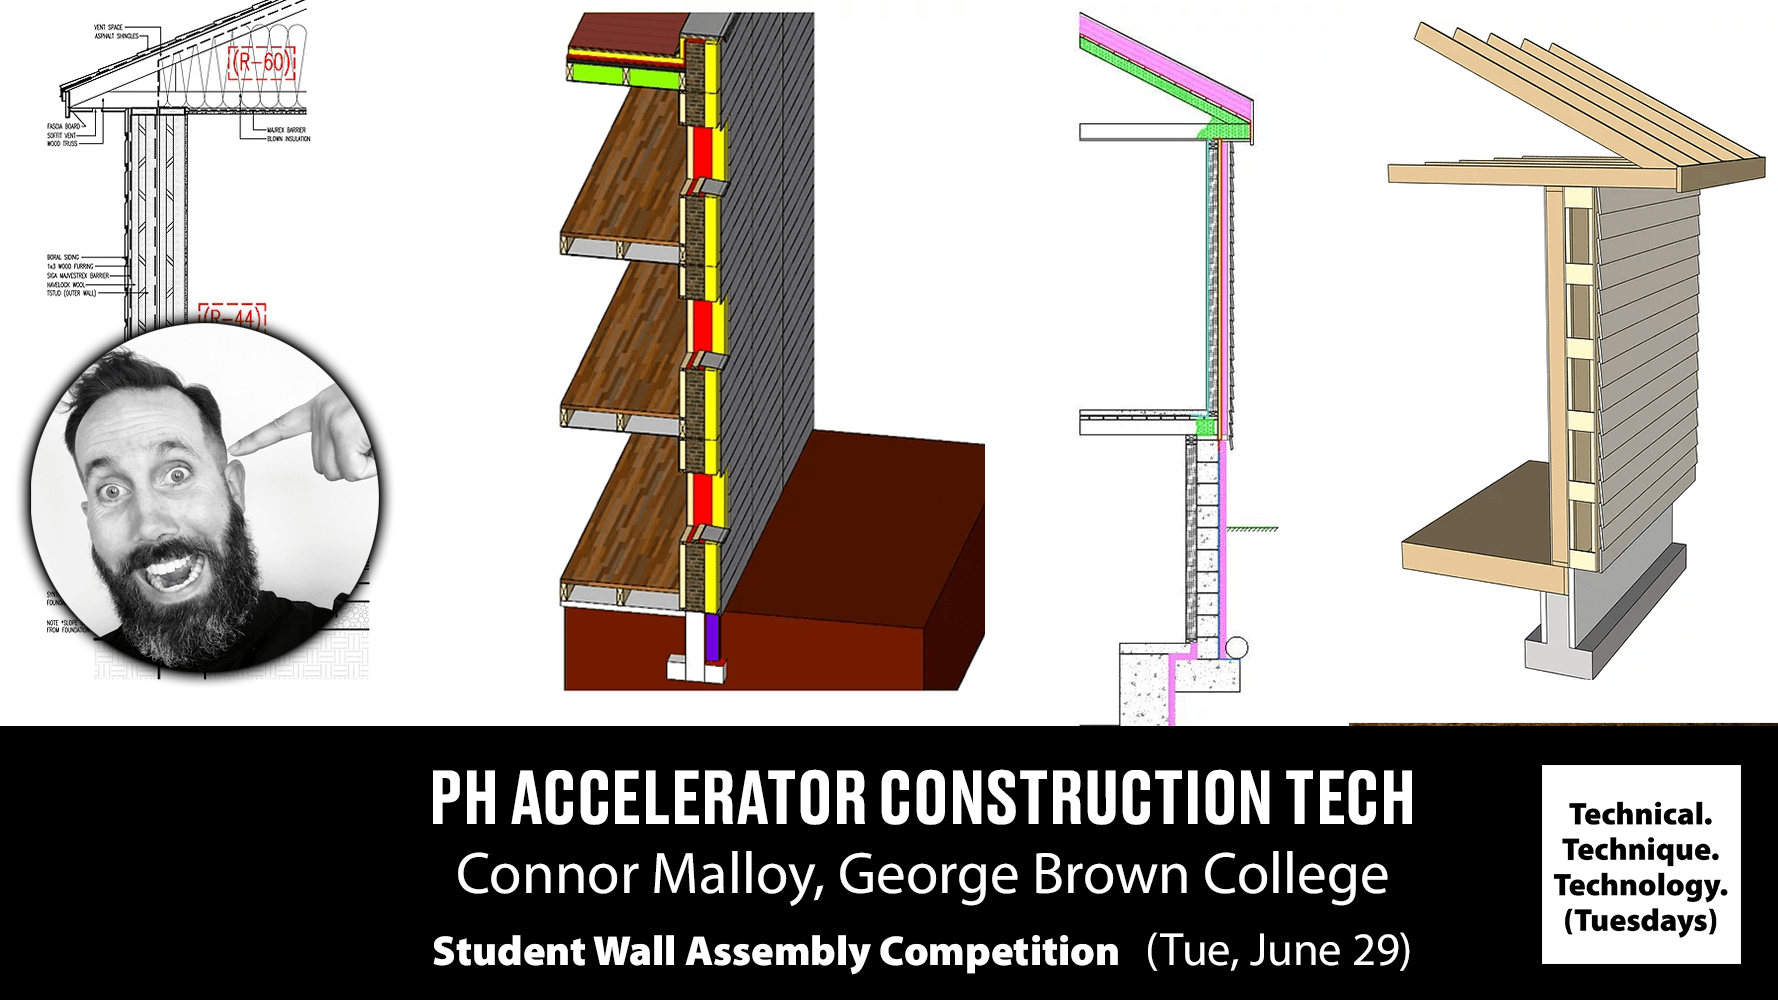 Student Wall Assembly Competition Takeaways